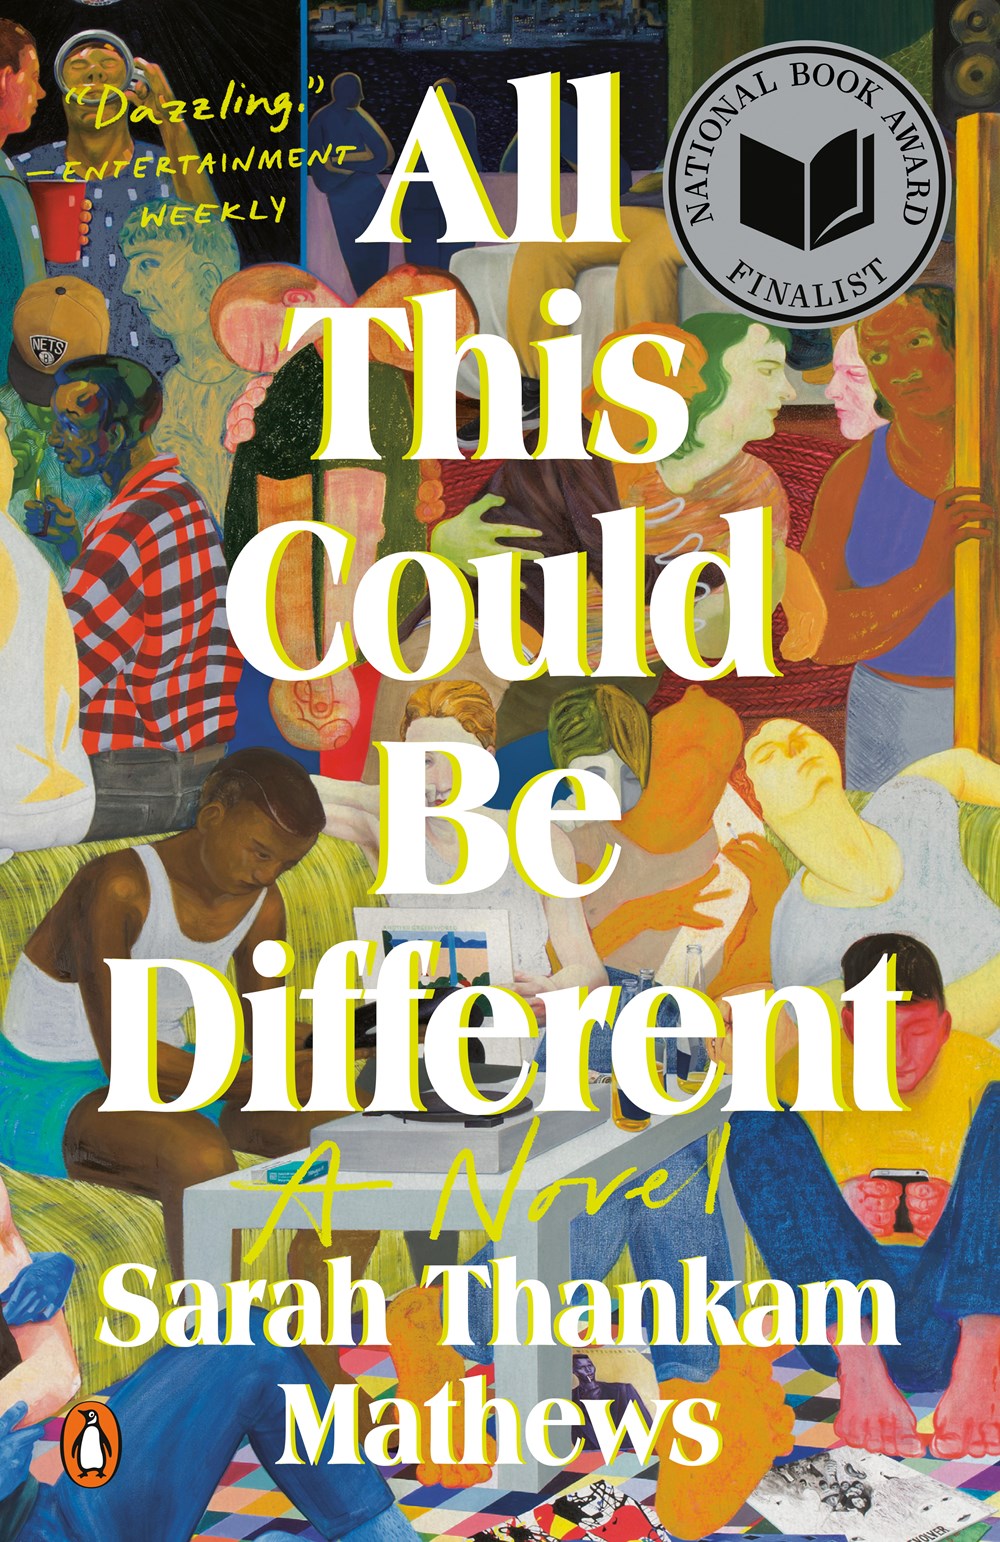 All This Could Be Different: A Novel by Sarah Thankam Mathews